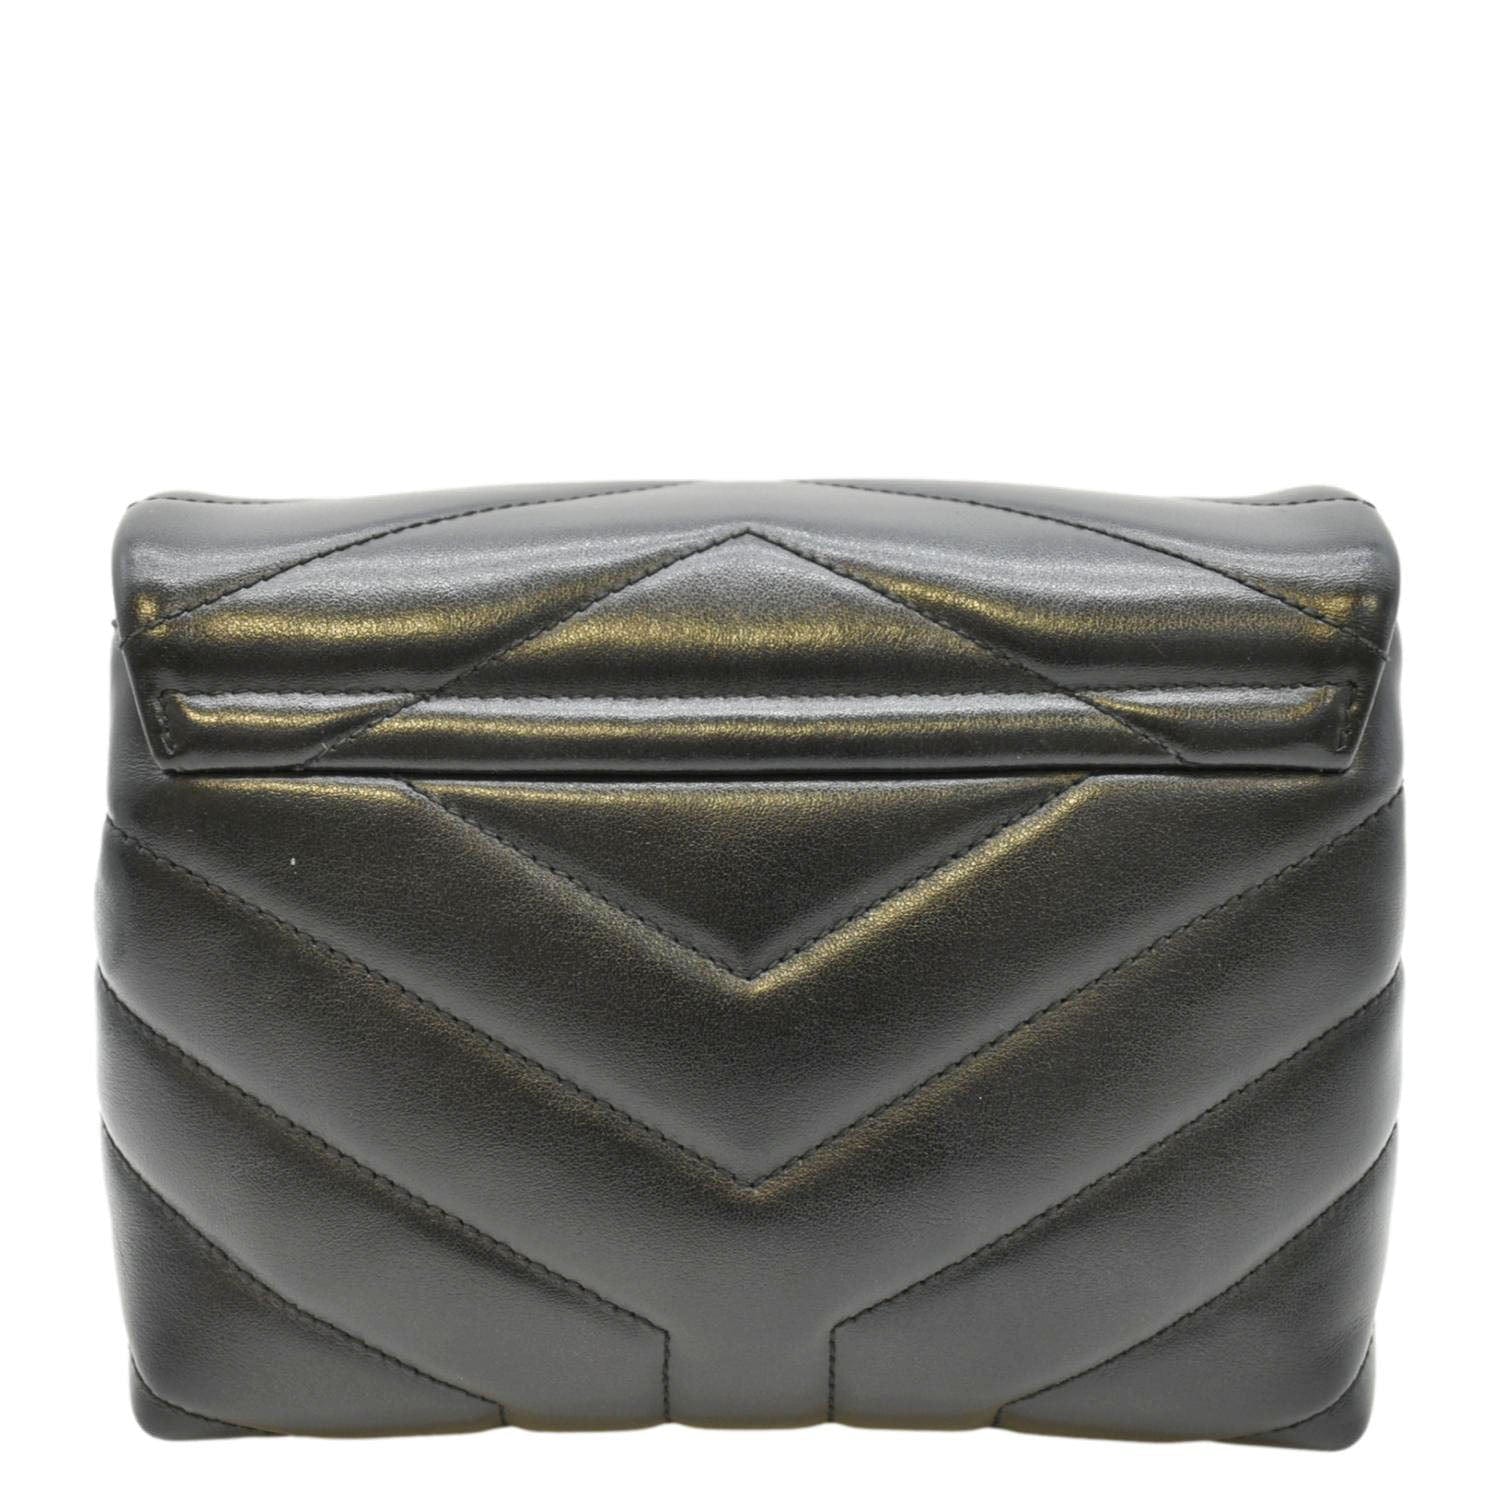 Saint Laurent Small Loulou Monogram Quilted Leather Grey Bag New